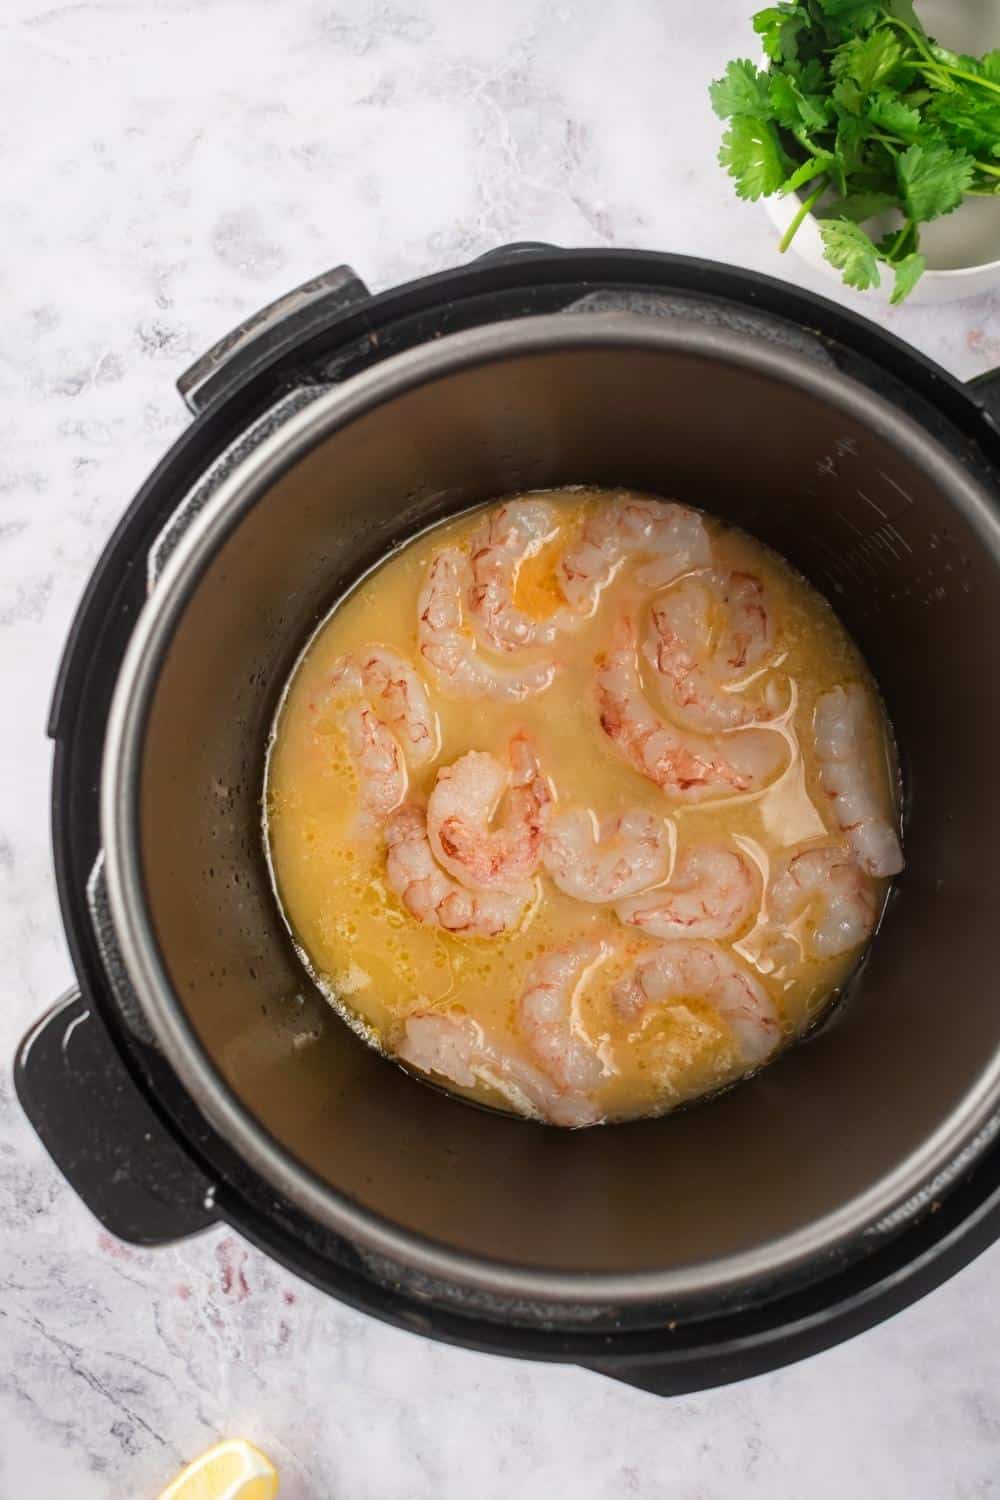 An instant pot filled with shrimp and a marinade.